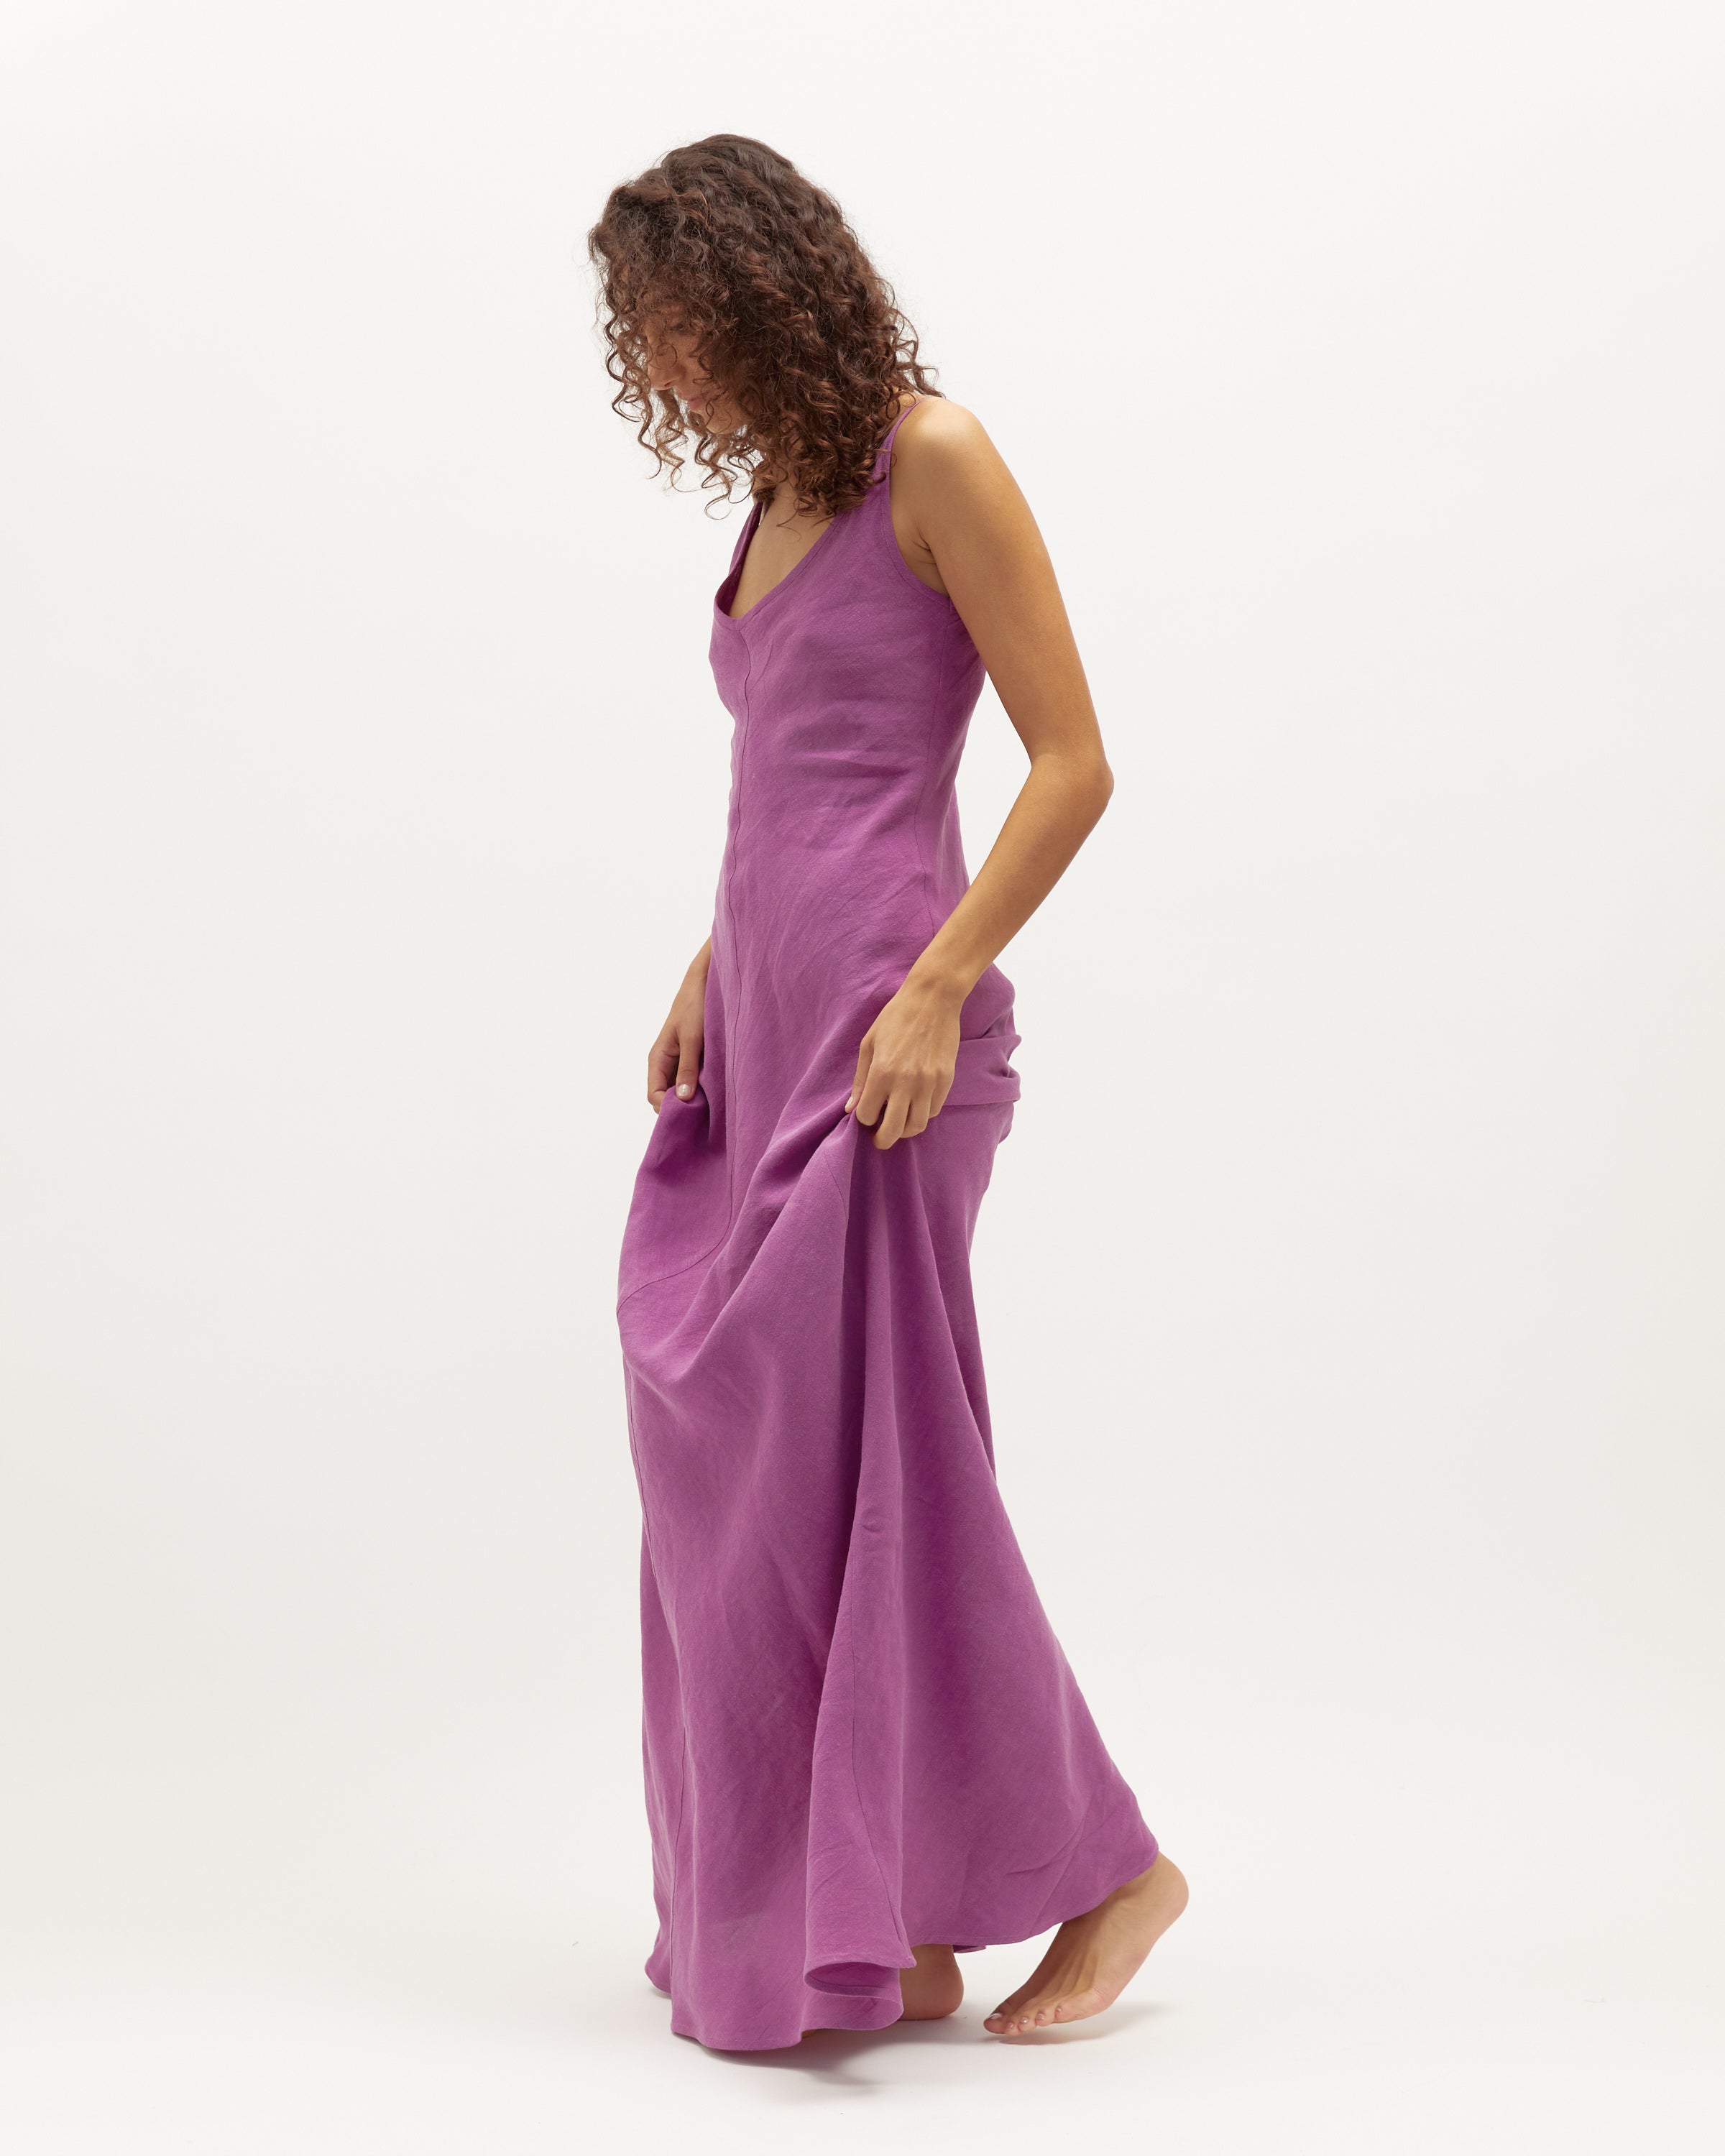 Sloane Dress | Berry Washed Linen $360